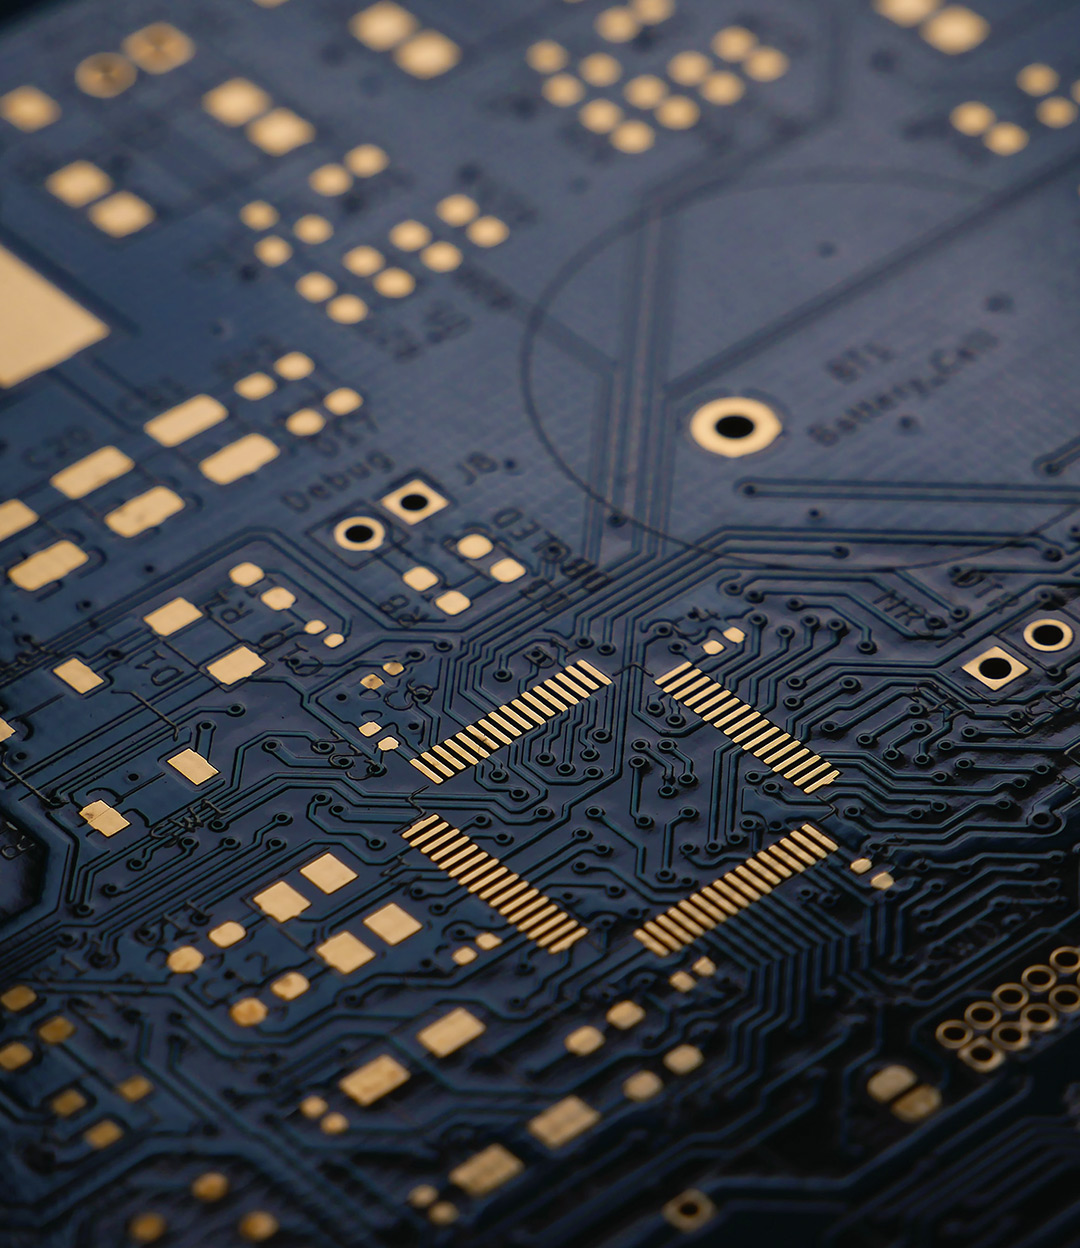 Close up image of a printed circuit board